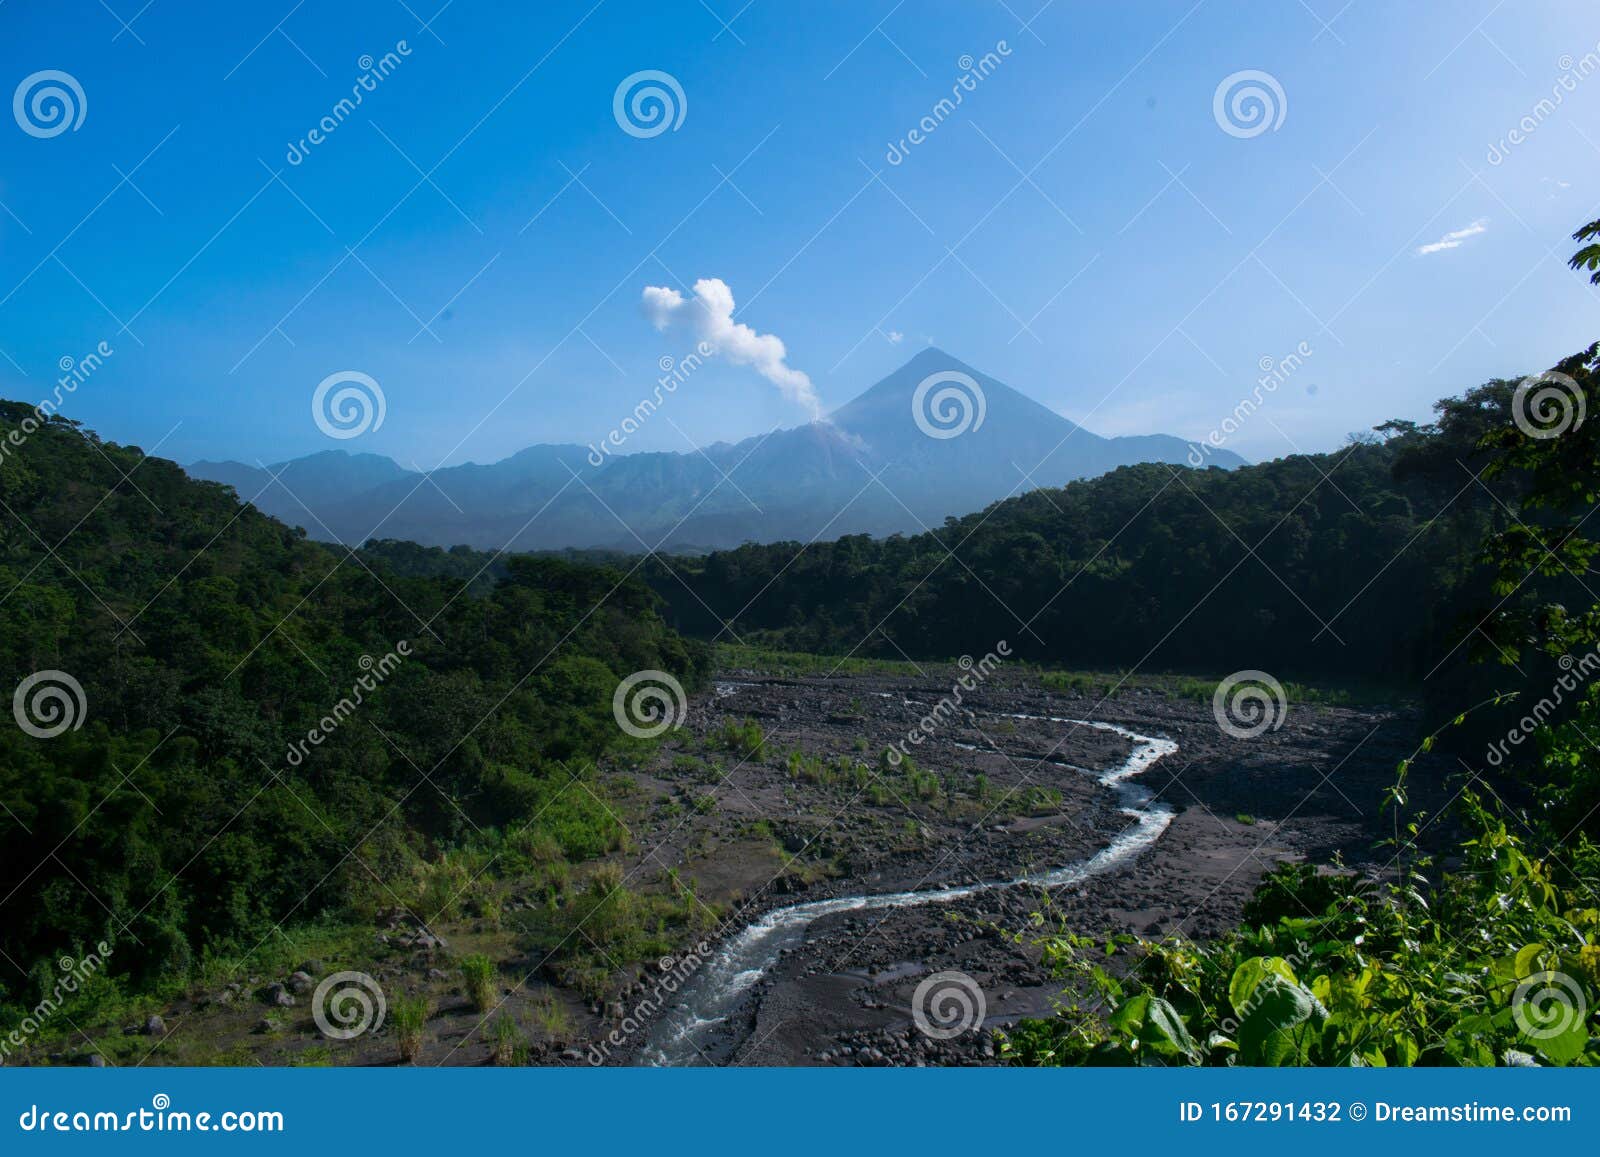 river in the middle of the jungle with two volcanoes in the background